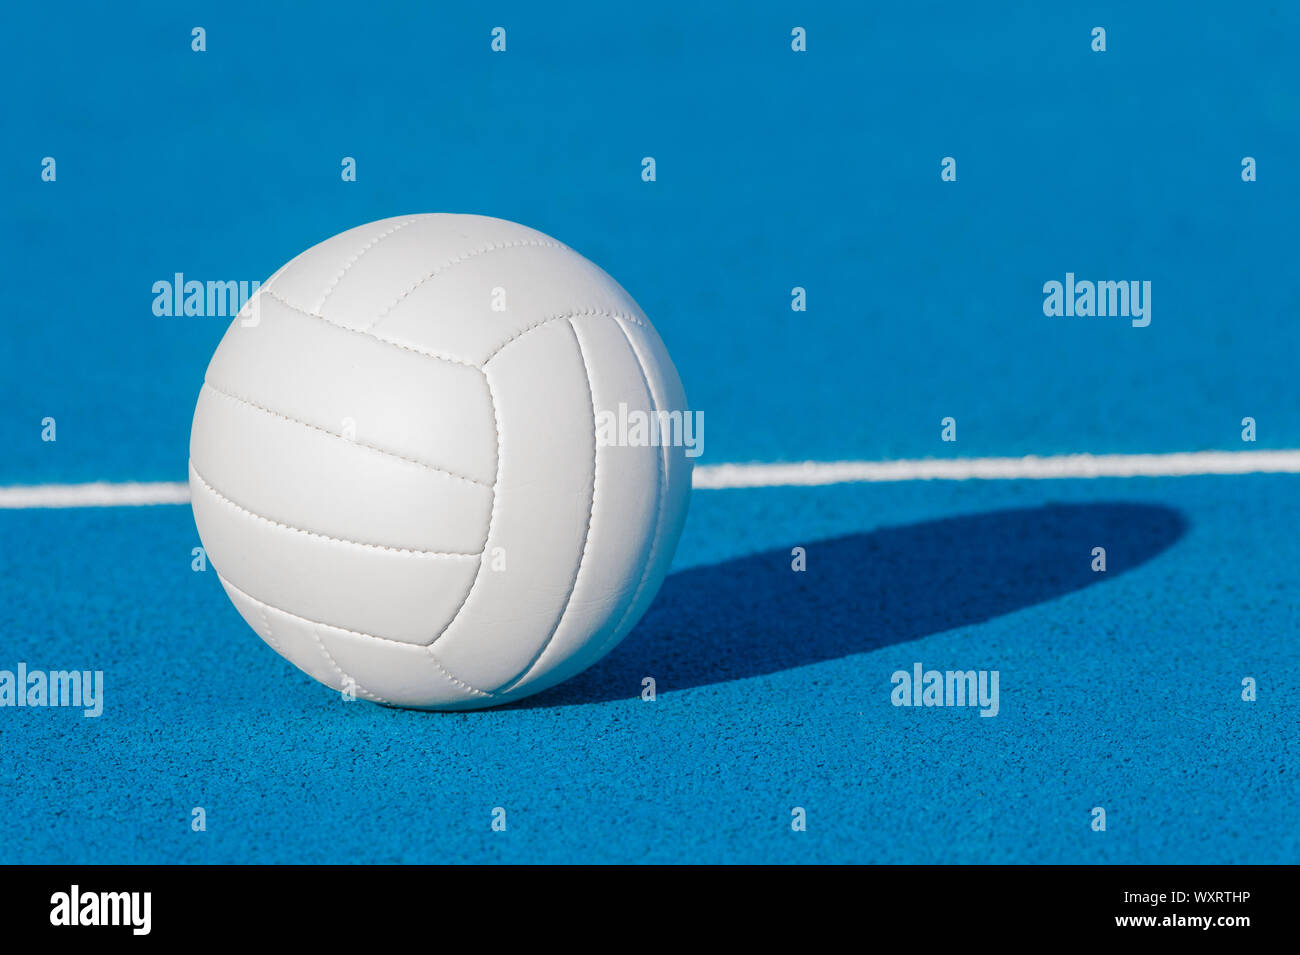 Volleyball ball on blue playground with white line Stock Photo - Alamy